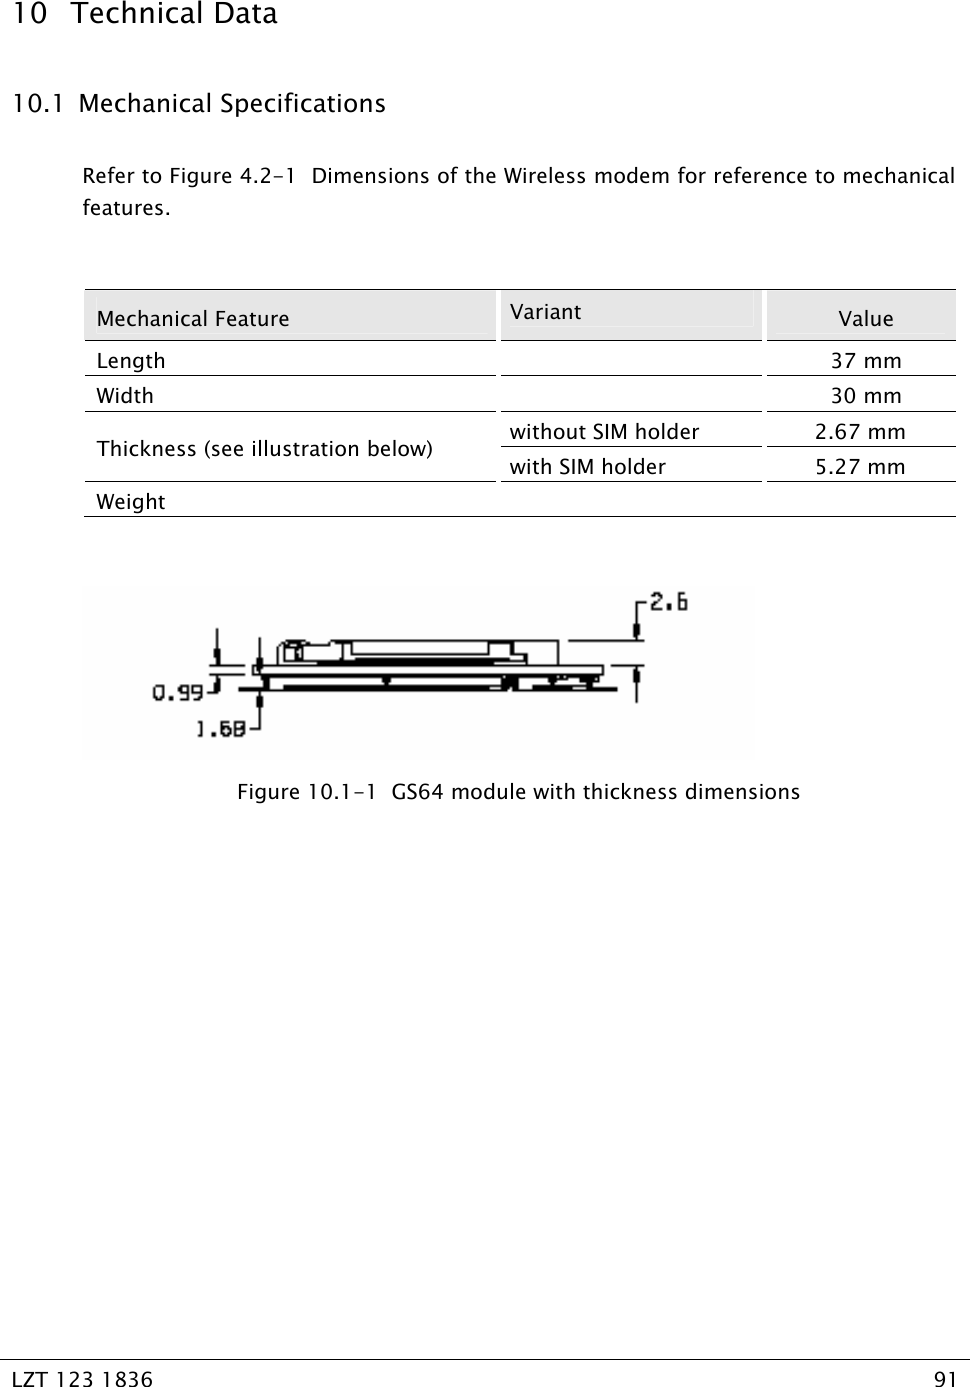   LZT 123 1836  91   10 Technical Data 10.1  Mechanical Specifications Refer to Figure 4.2-1  Dimensions of the Wireless modem for reference to mechanical features.  Mechanical Feature  Variant  Value Length  37 mm Width  30 mm without SIM holder  2.67 mm Thickness (see illustration below)  with SIM holder  5.27 mm Weight      Figure 10.1-1  GS64 module with thickness dimensions   